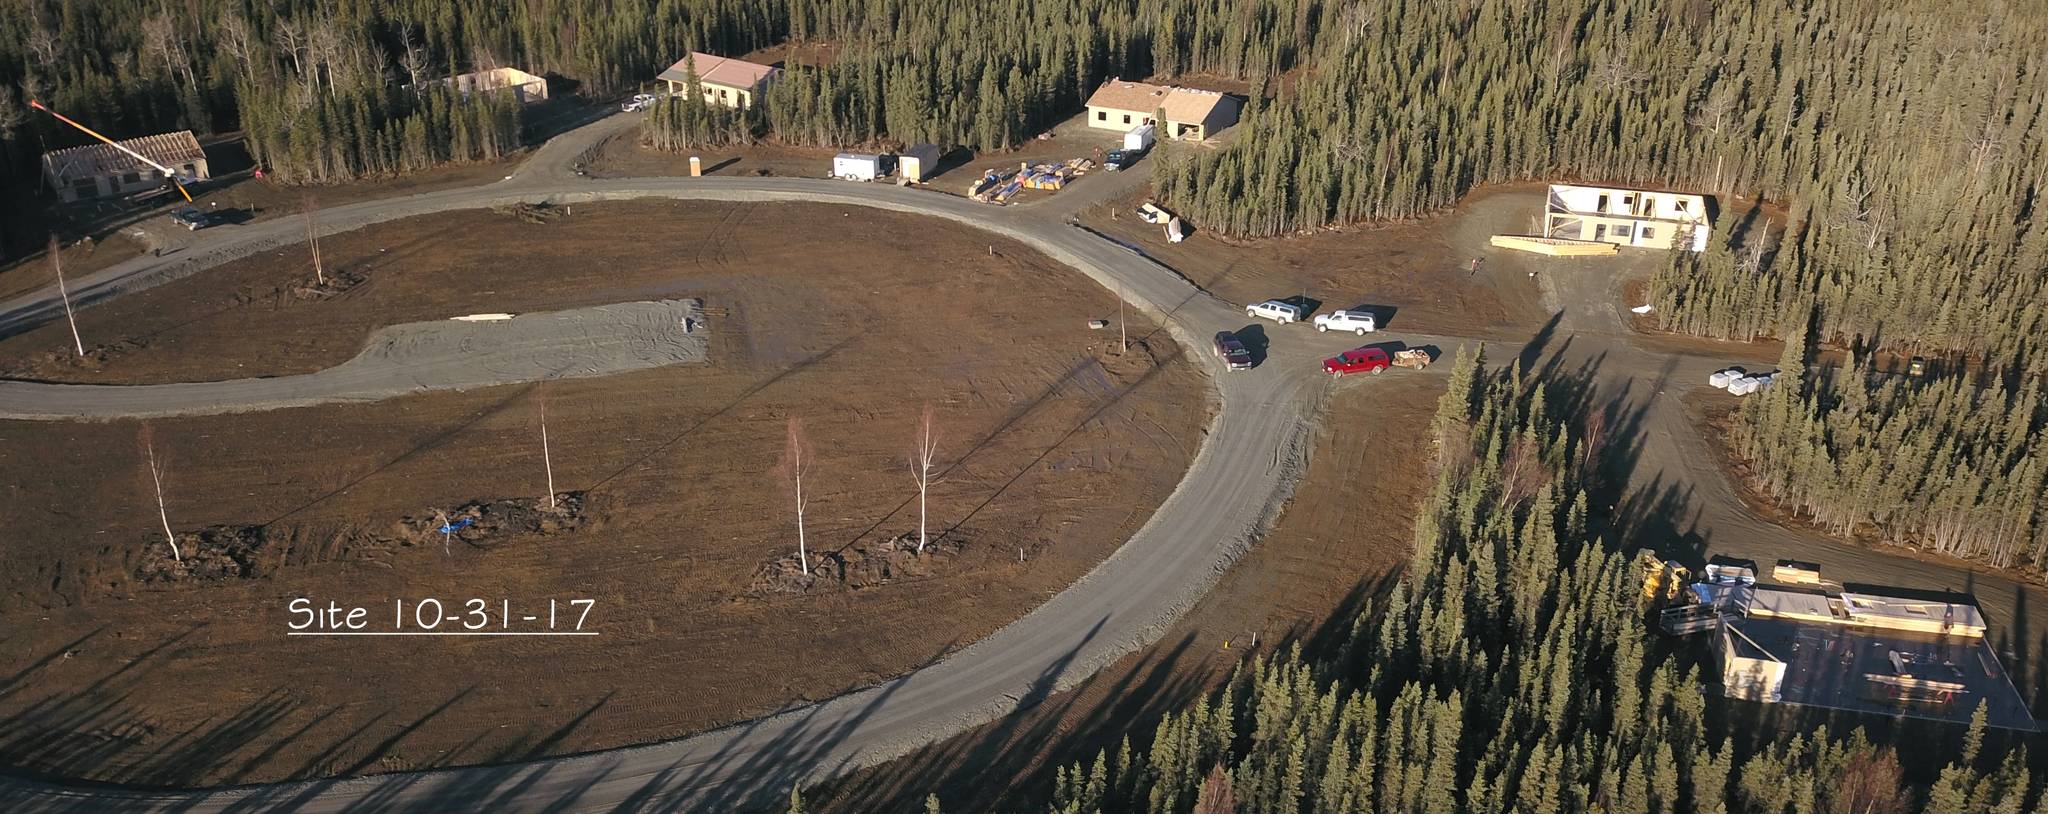 This aerial photograph shows the intentional neighborhood being built by Hope Community Resources as a future community for individuals with disabilities on Oct. 31, 2017 near Sterling, Alaska. (Photo courtesy Roy Scheller/Hope Community Resources)